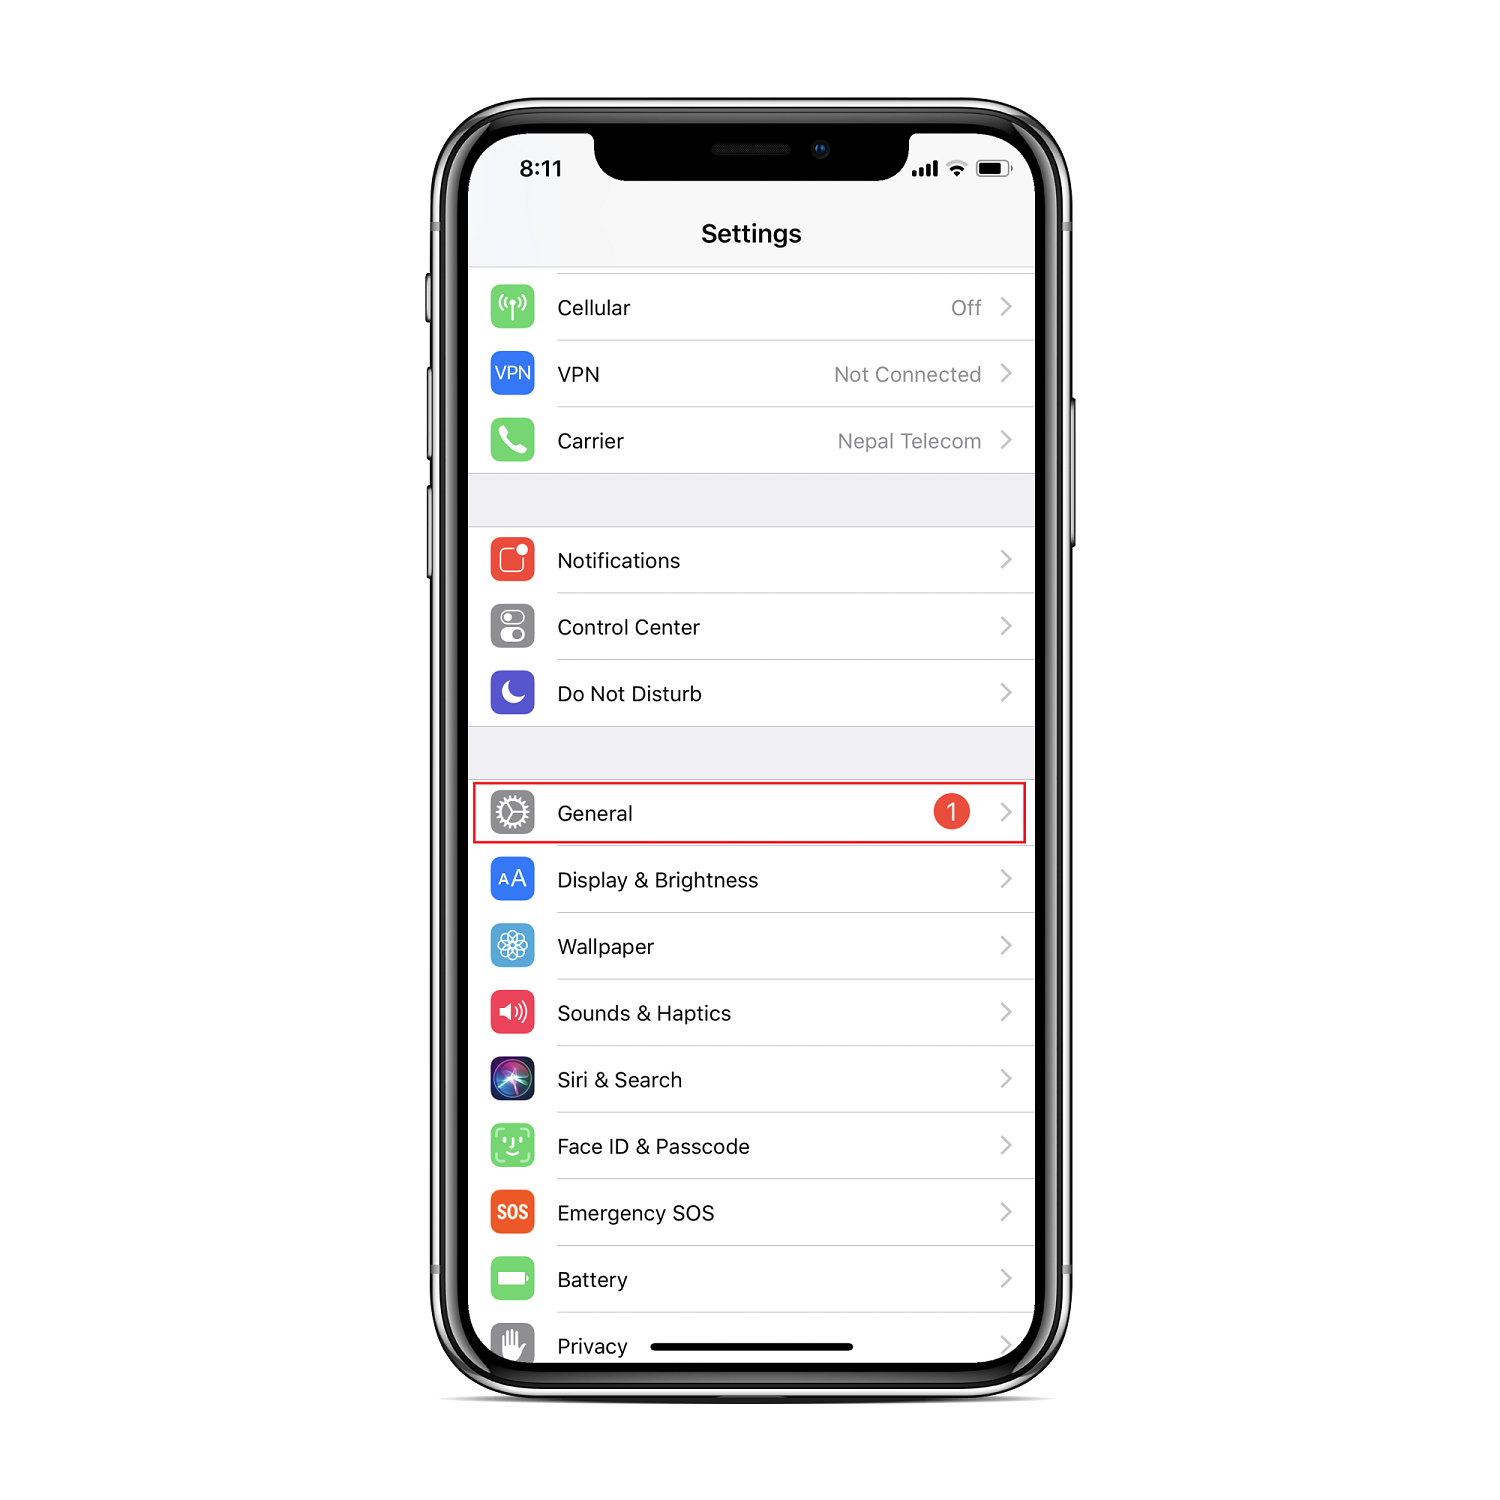 How to Identify if Your iPhone X has Qualcomm or Intel modem? Which is Faster? 1 How to Identify if Your iPhone X has Qualcomm or Intel modem? Which is Faster? How to Identify if Your iPhone X has Qualcomm or Intel modem? Which is Faster?